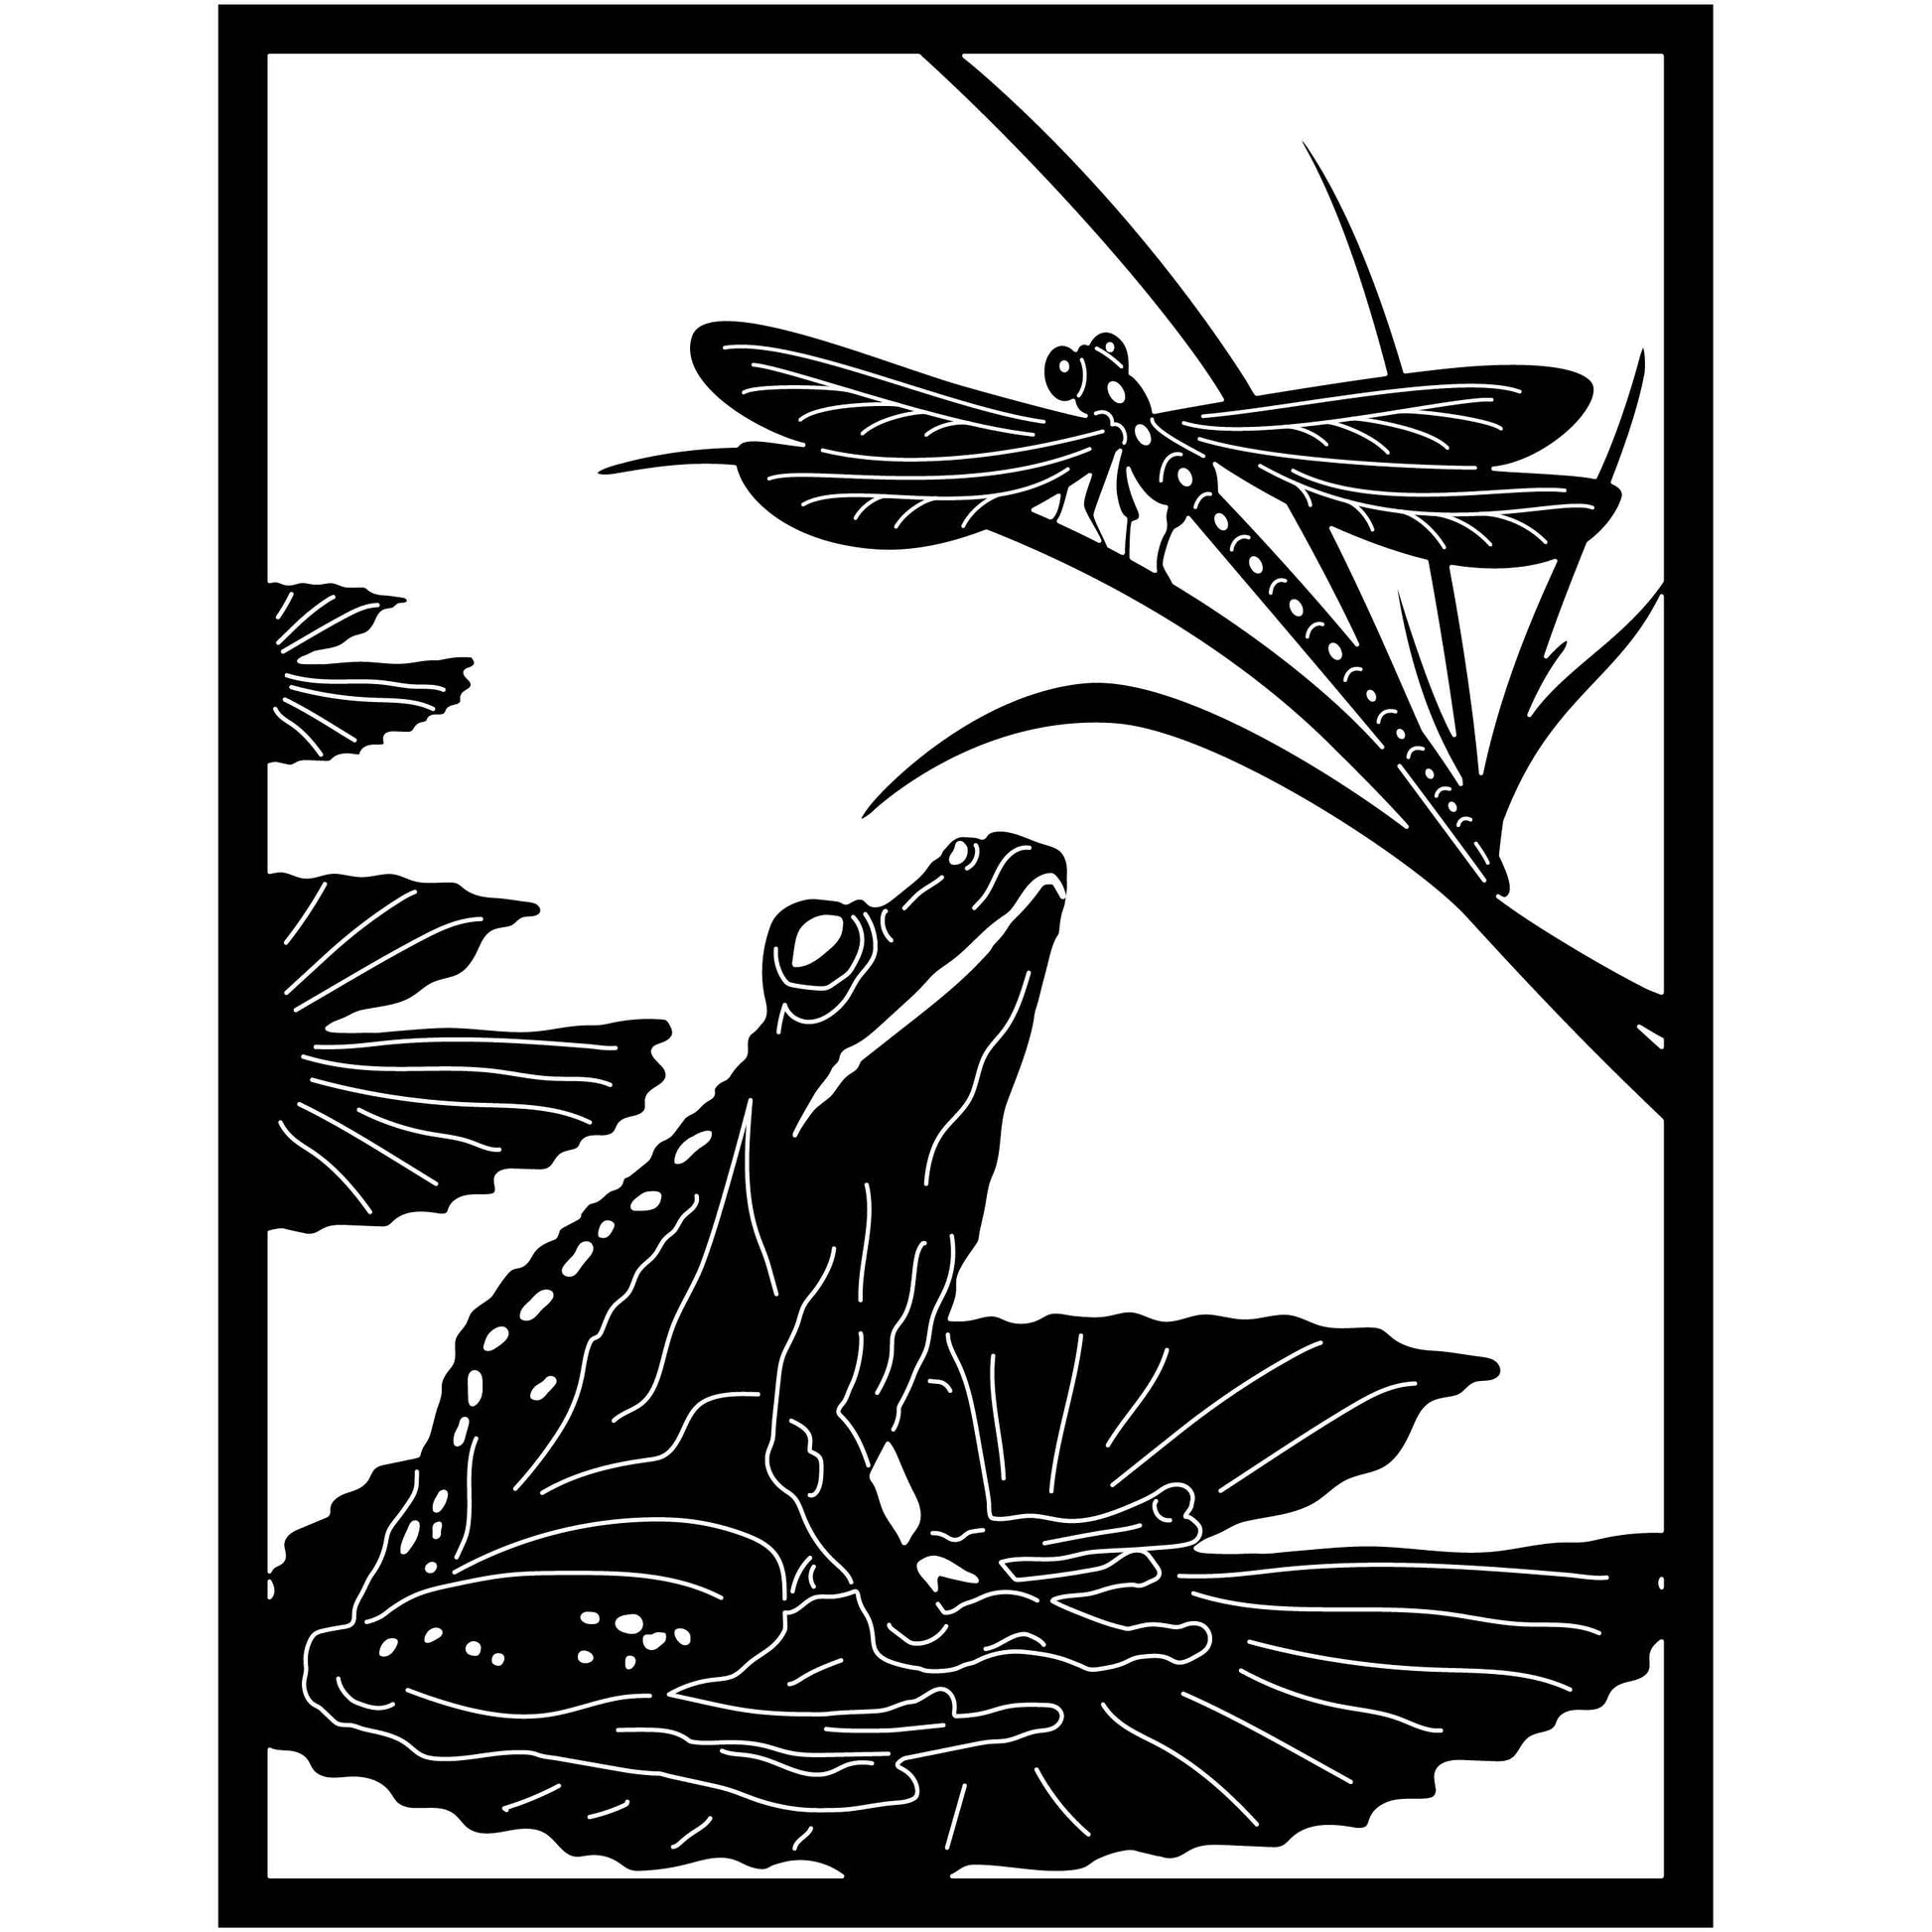 Frog on Lily Pad and Dragonfly on Leaf Scene-DXF files cut ready for cnc  machines